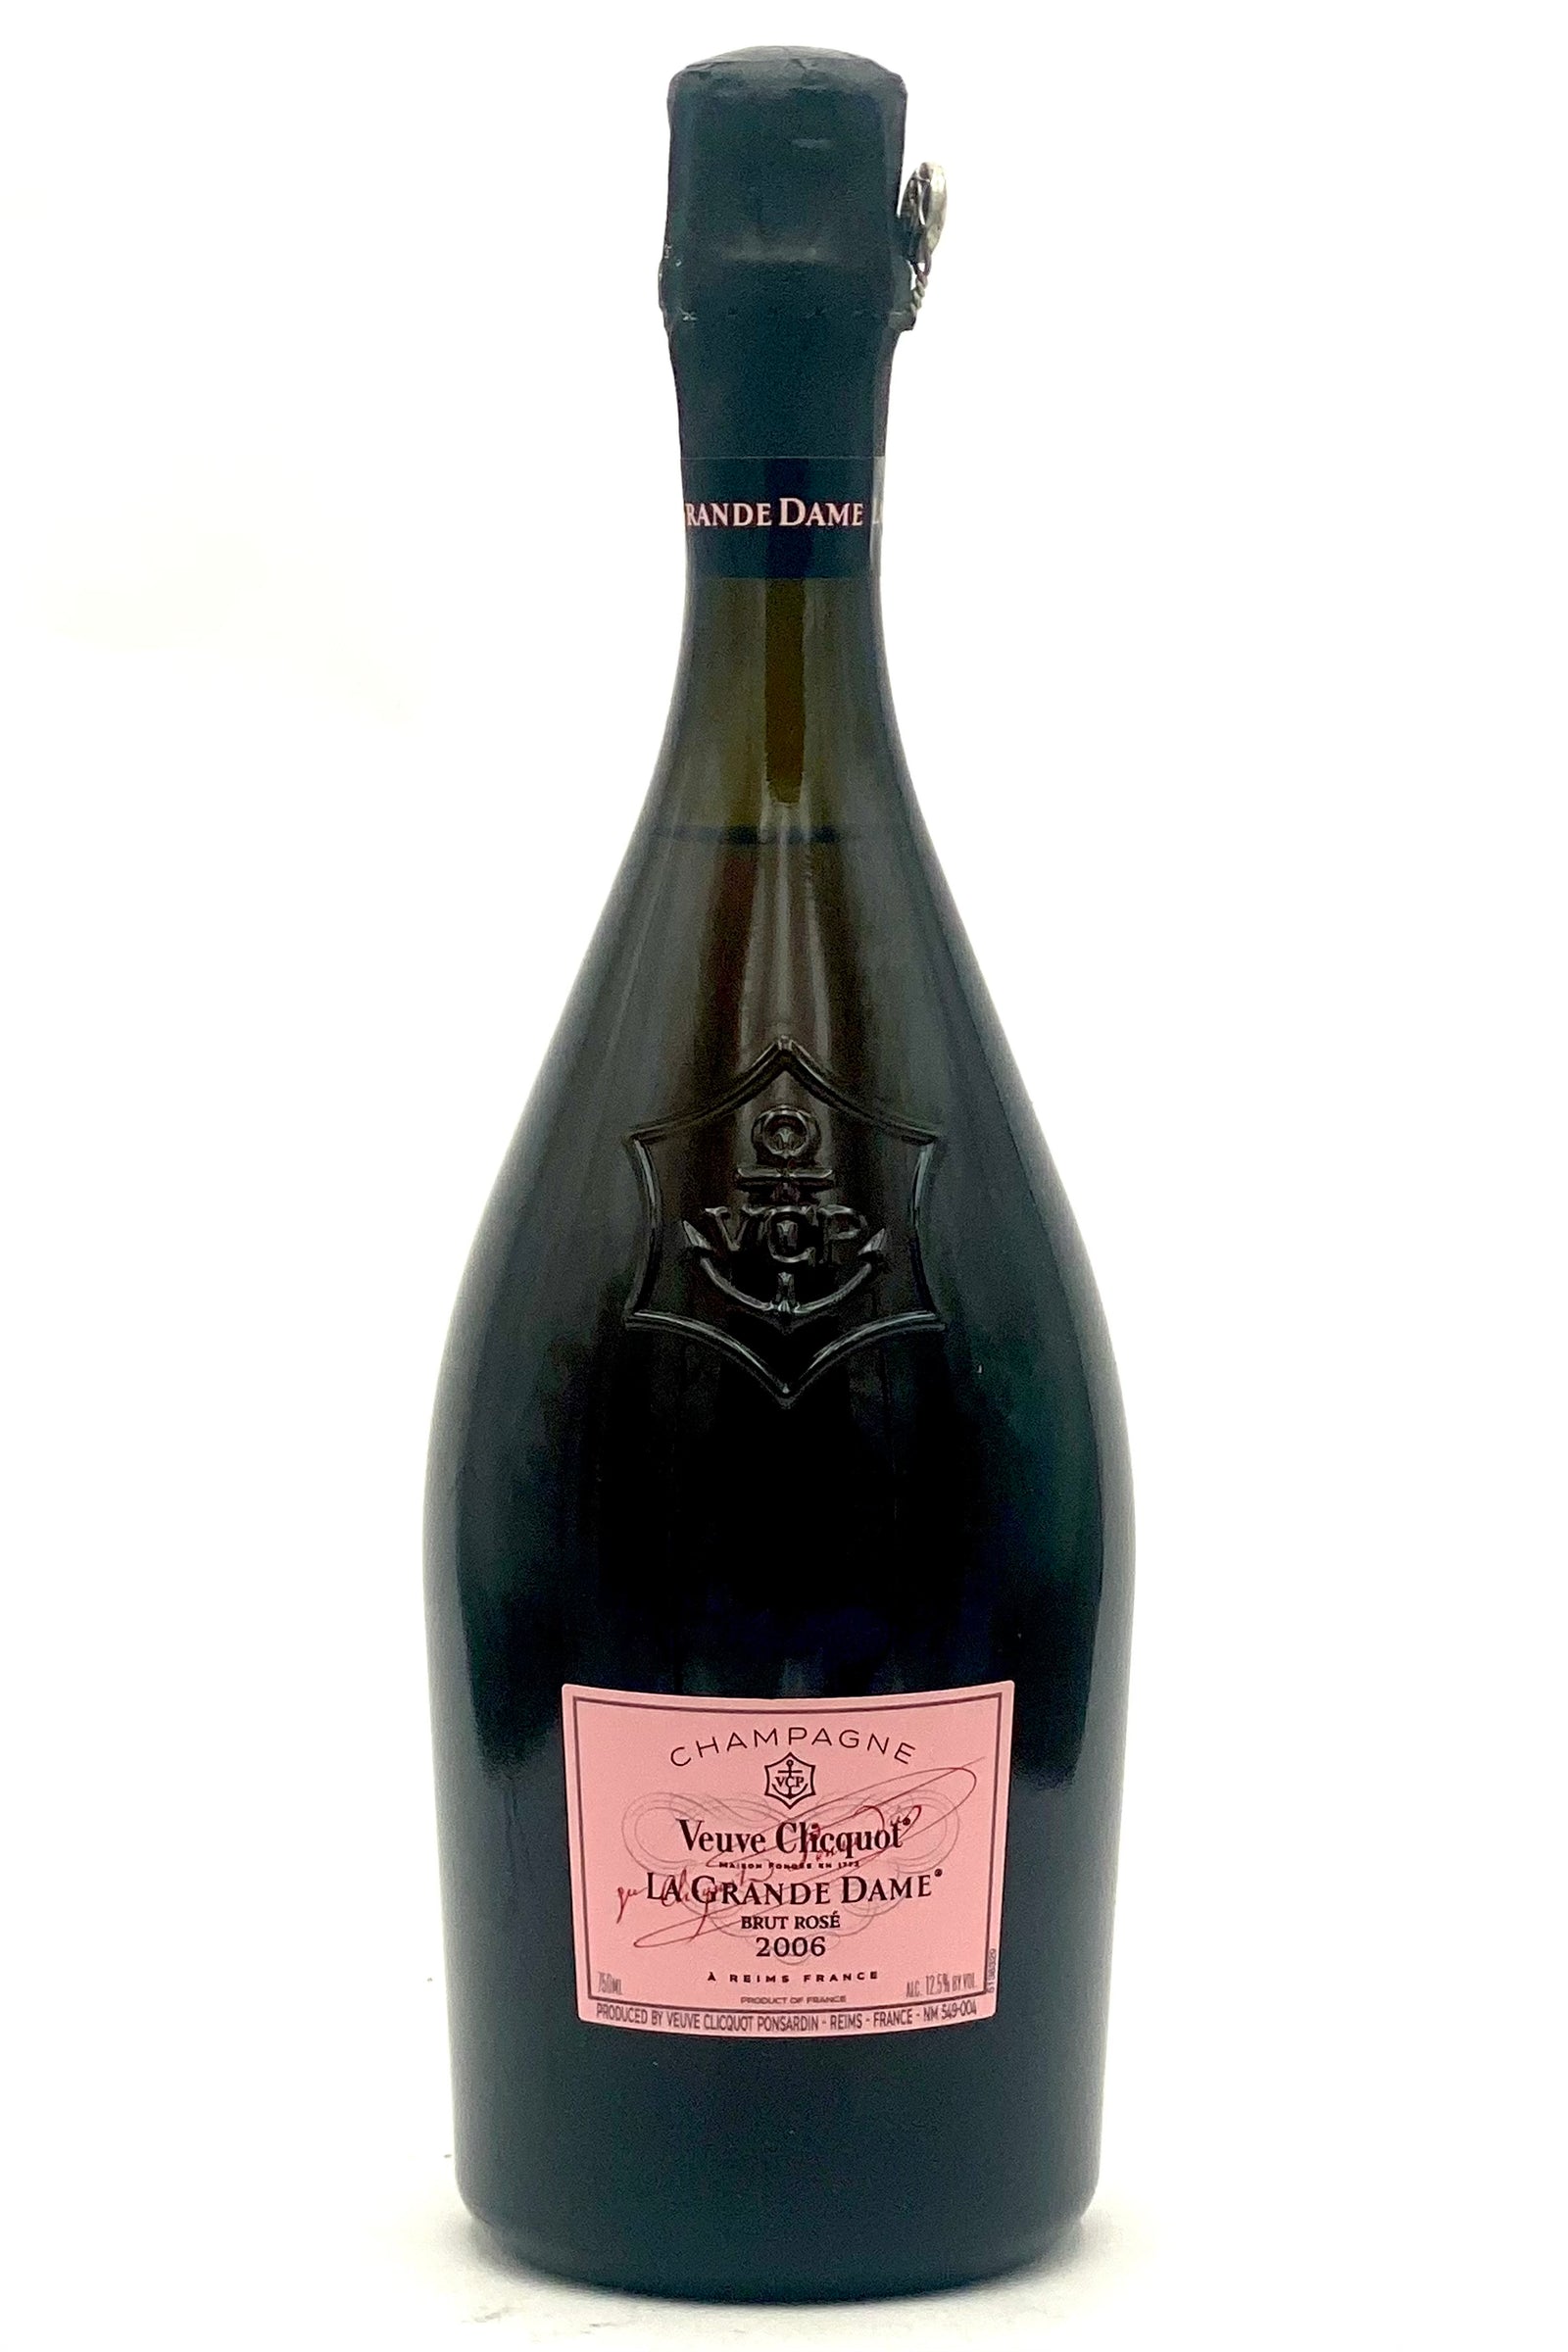 Veuve Clicquot Rich Rosé Champagne - Blackwell's Wines & Spirits